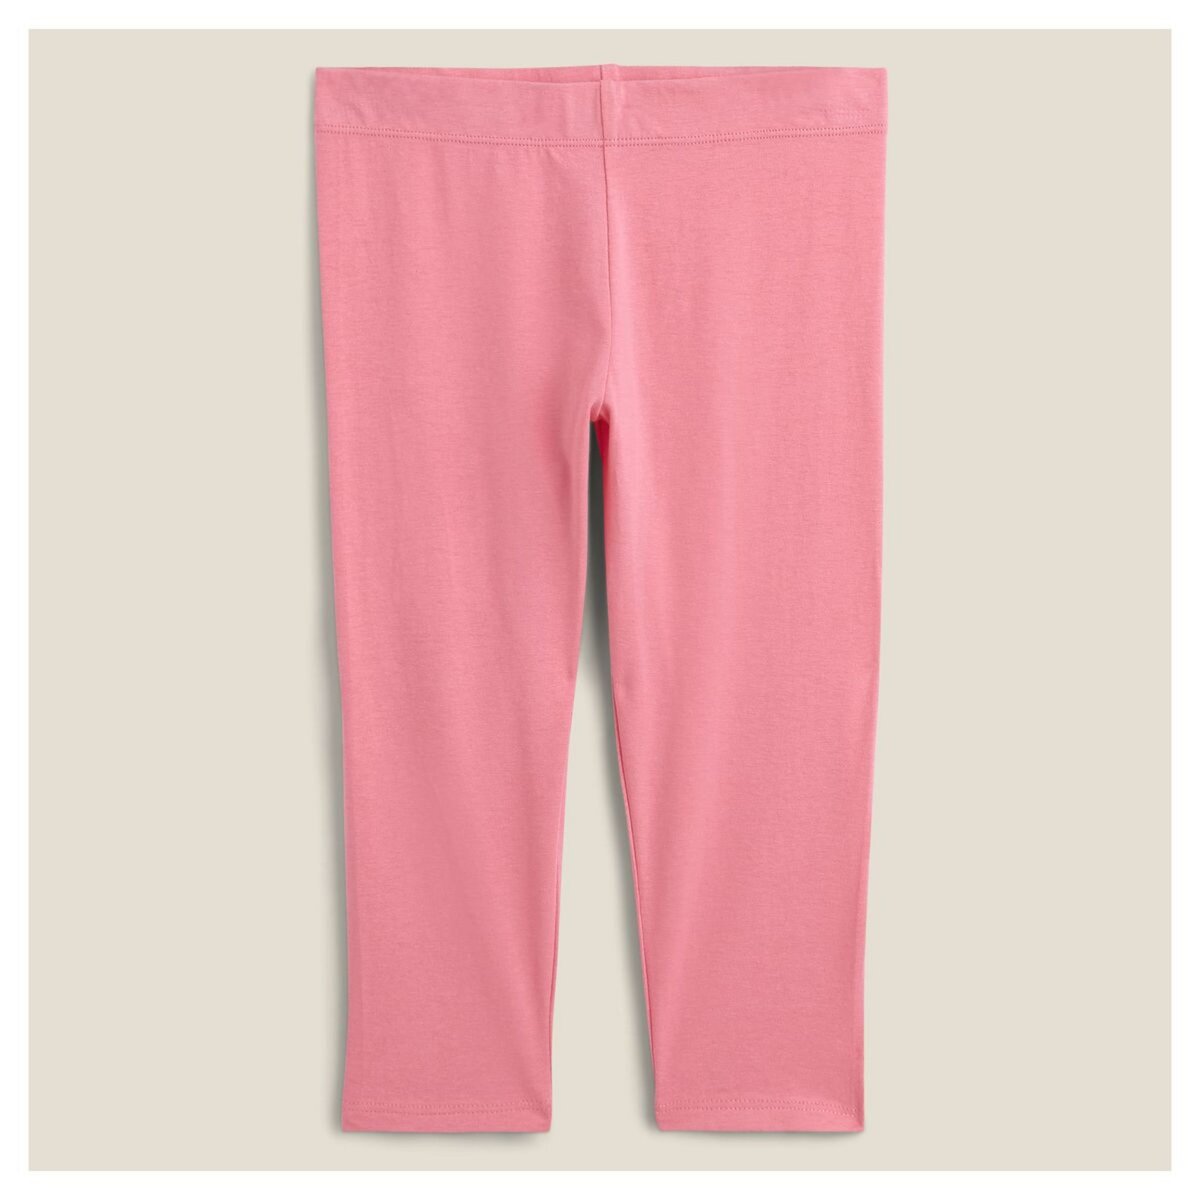 IN EXTENSO Legging court fille